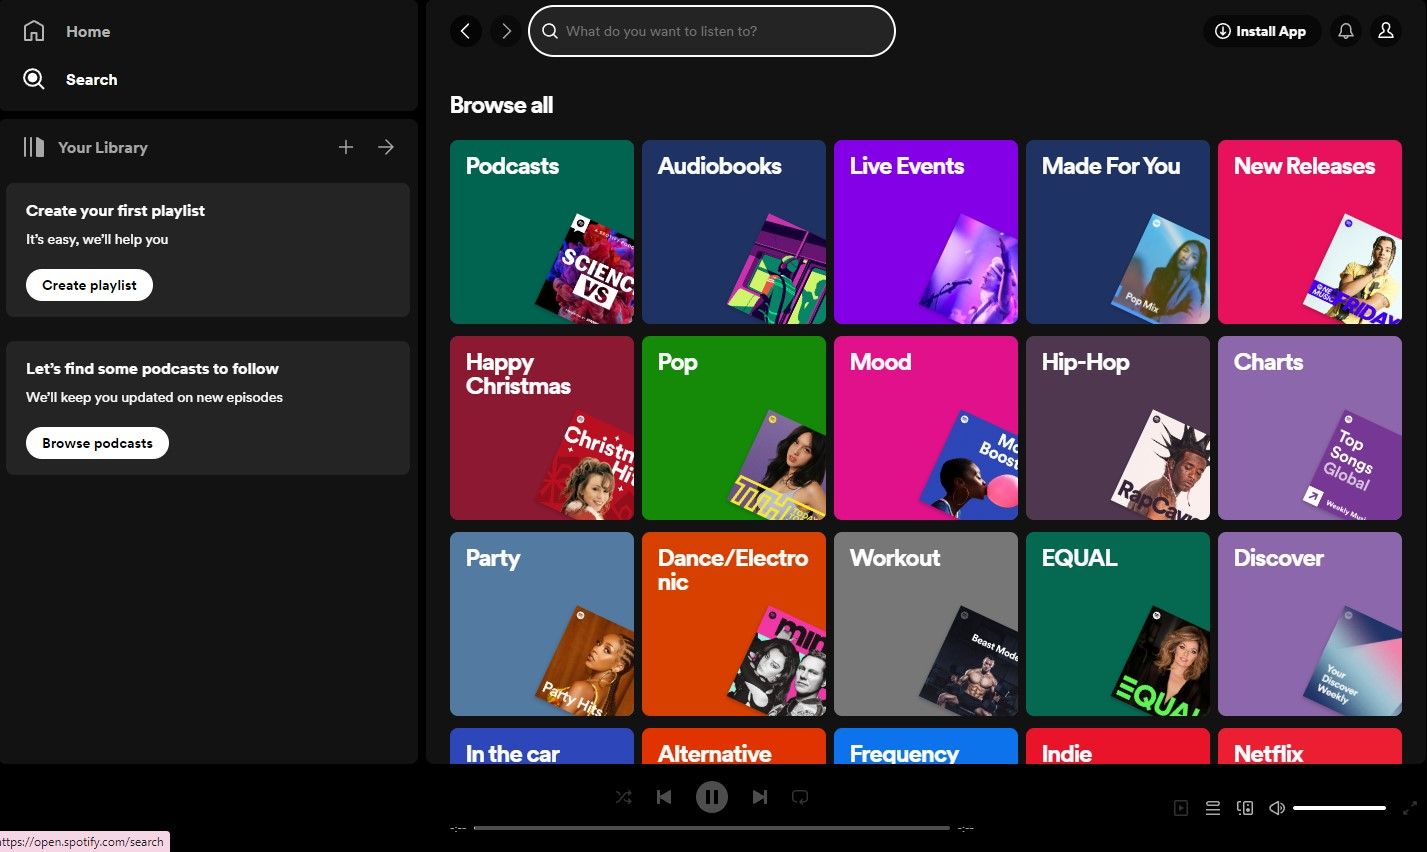 The Spotify web player showing the browsing options.